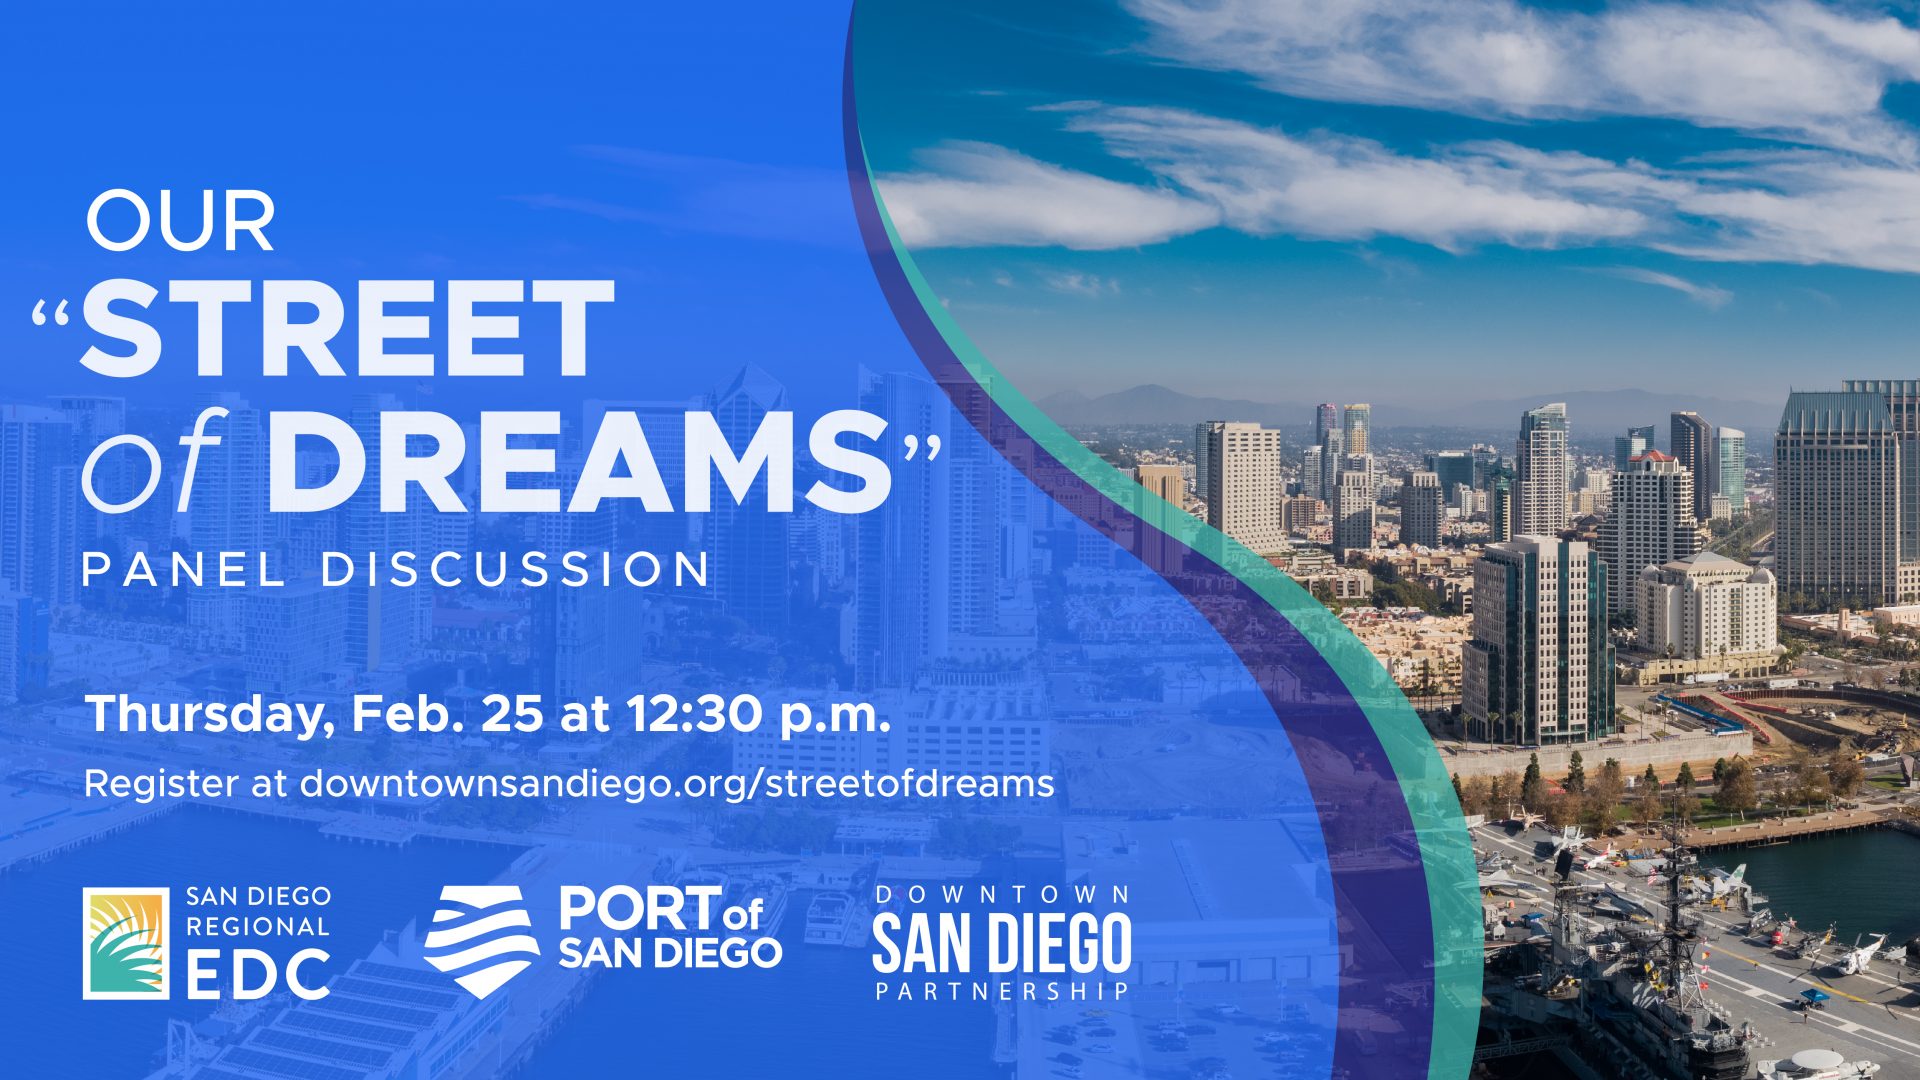 Our Street of Dreams Panel Discussion Thursday Feb 25 at 12:30 p.m. register at by clicking here.